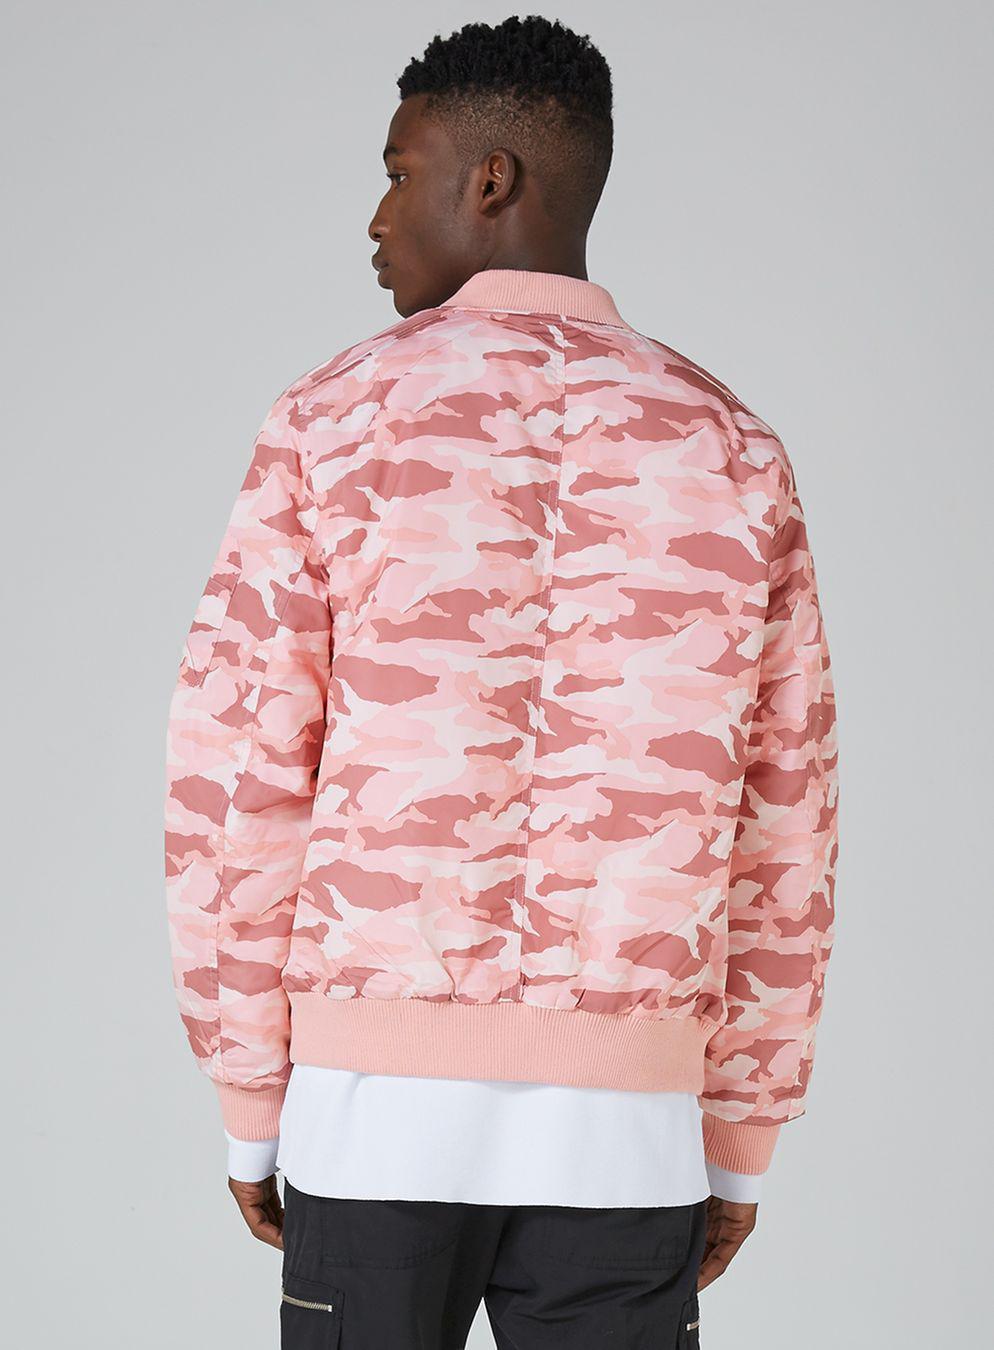 Lyst - Topman Pastel Pink Camouflage Bomber Jacket in Pink for Men